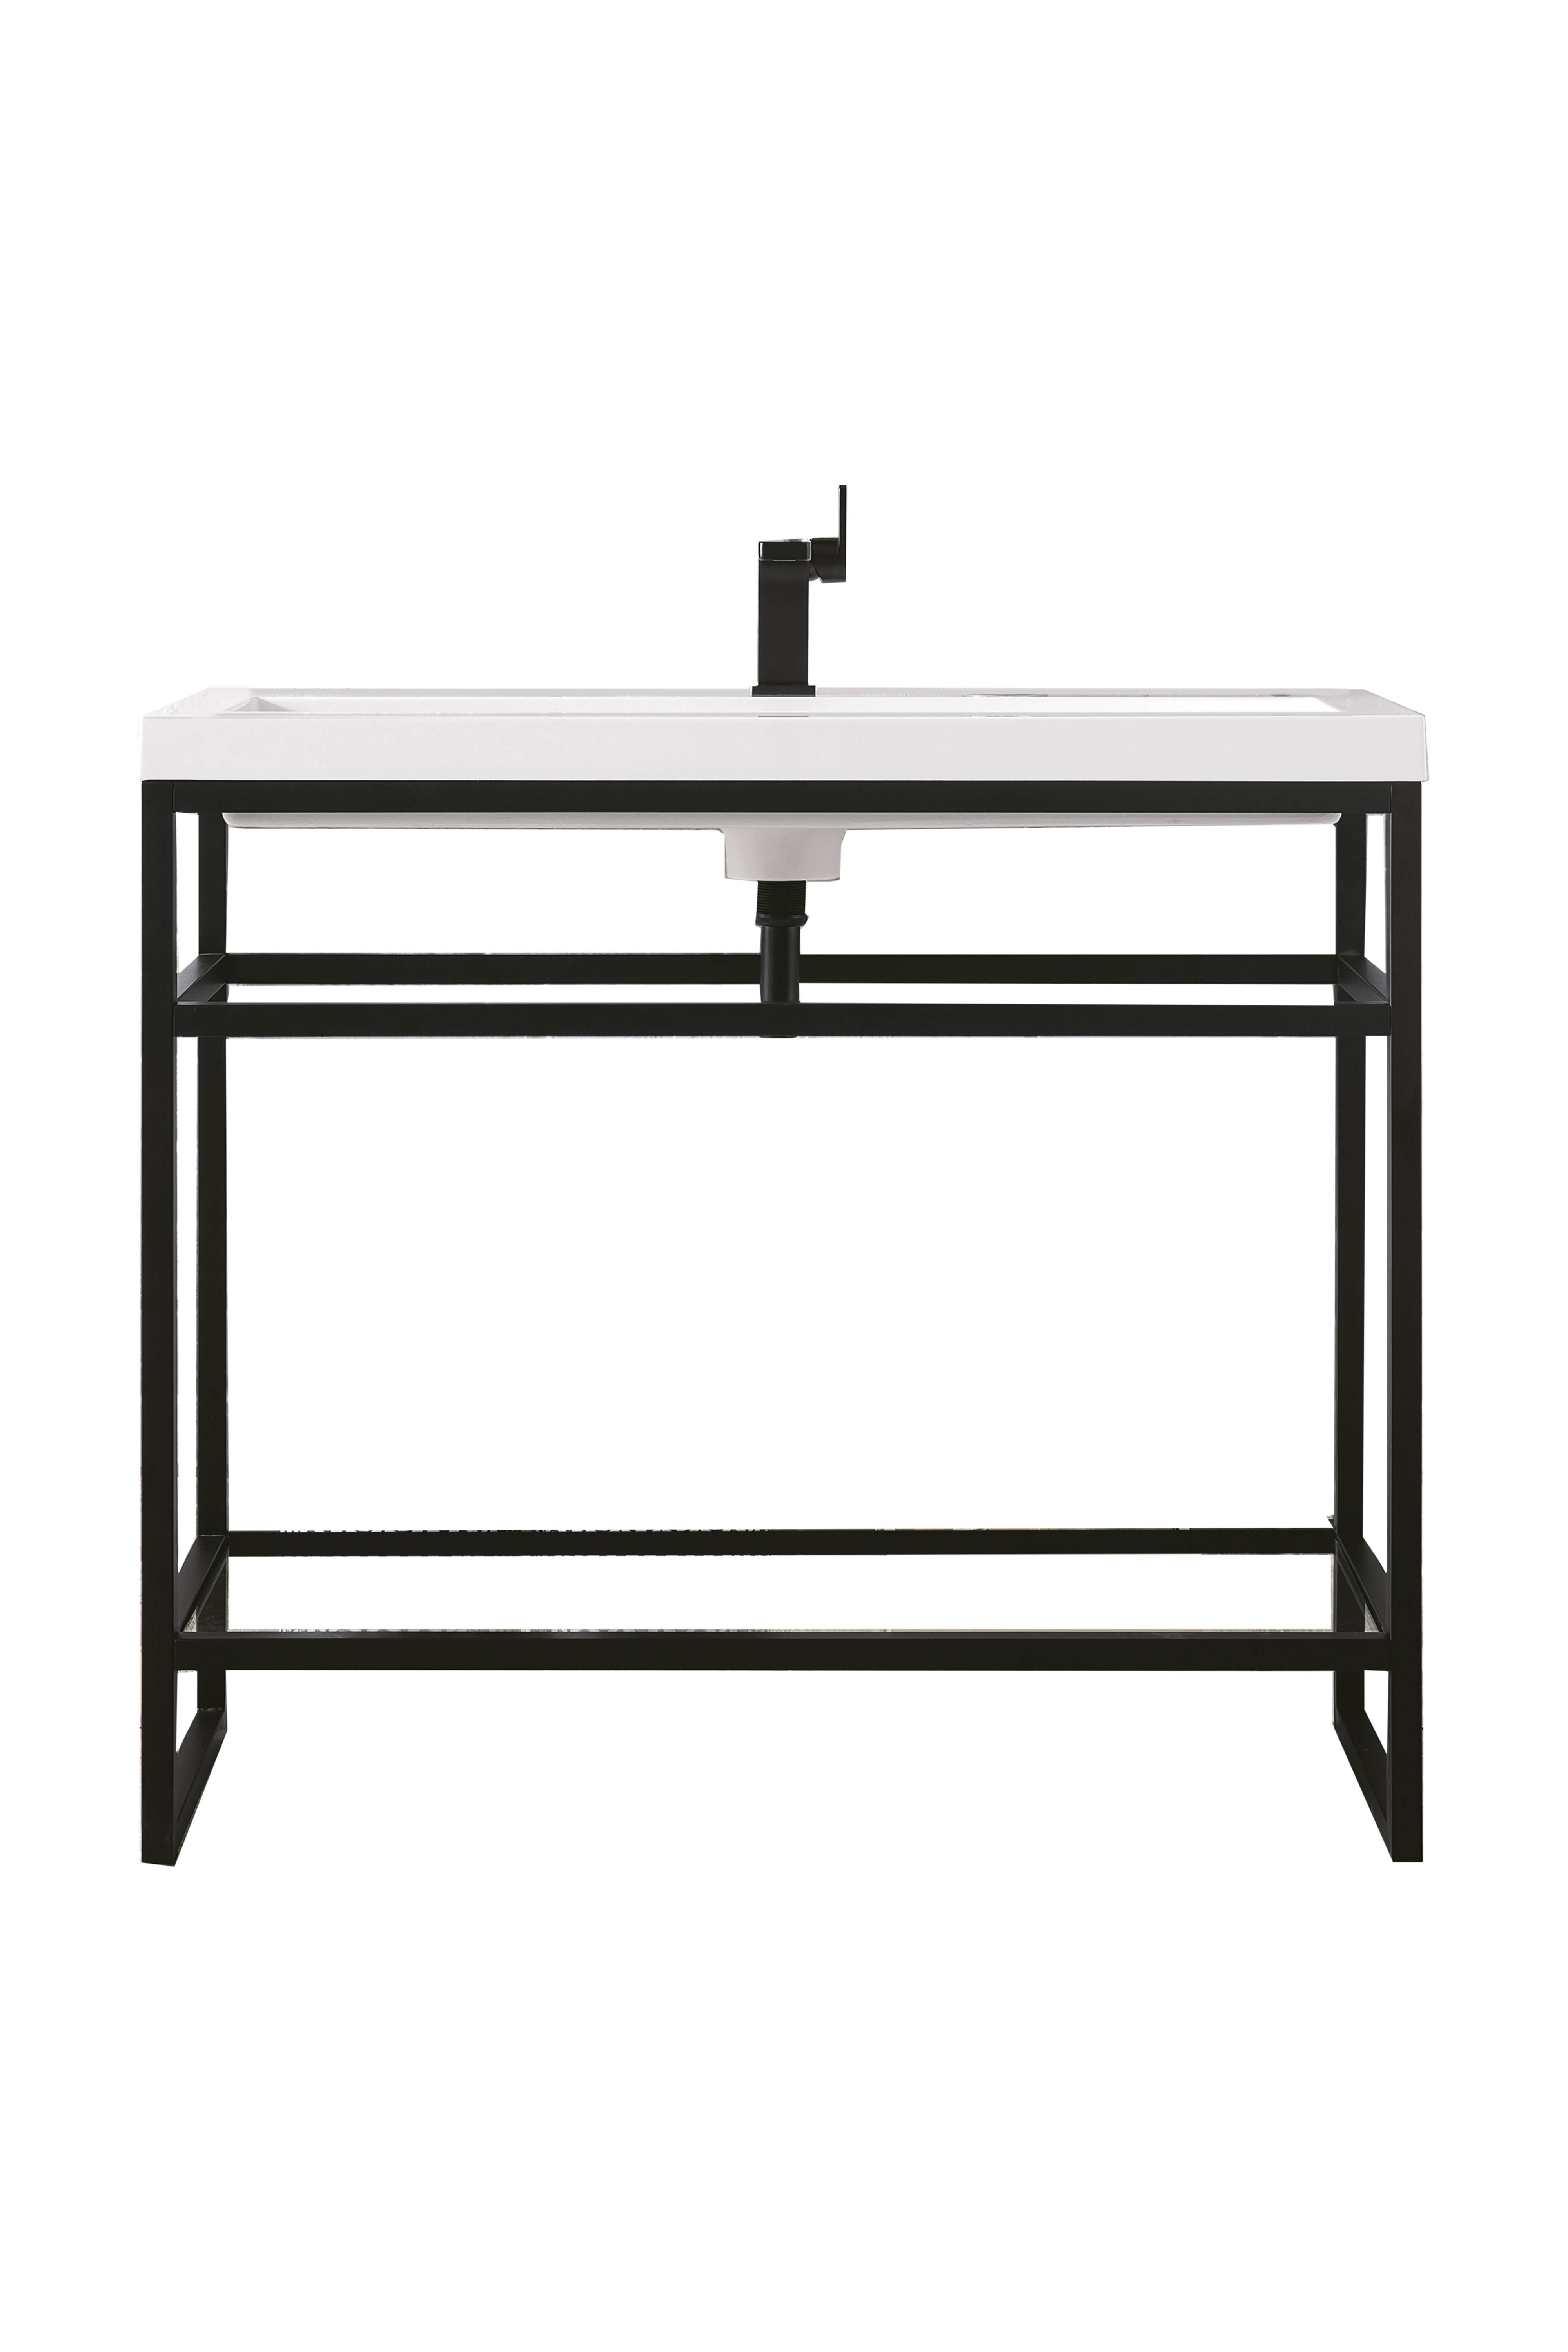 James Martin C105V39.5MBKWG Boston 39.5" Stainless Steel Sink Console, Matte Black w/ White Glossy Composite Countertop